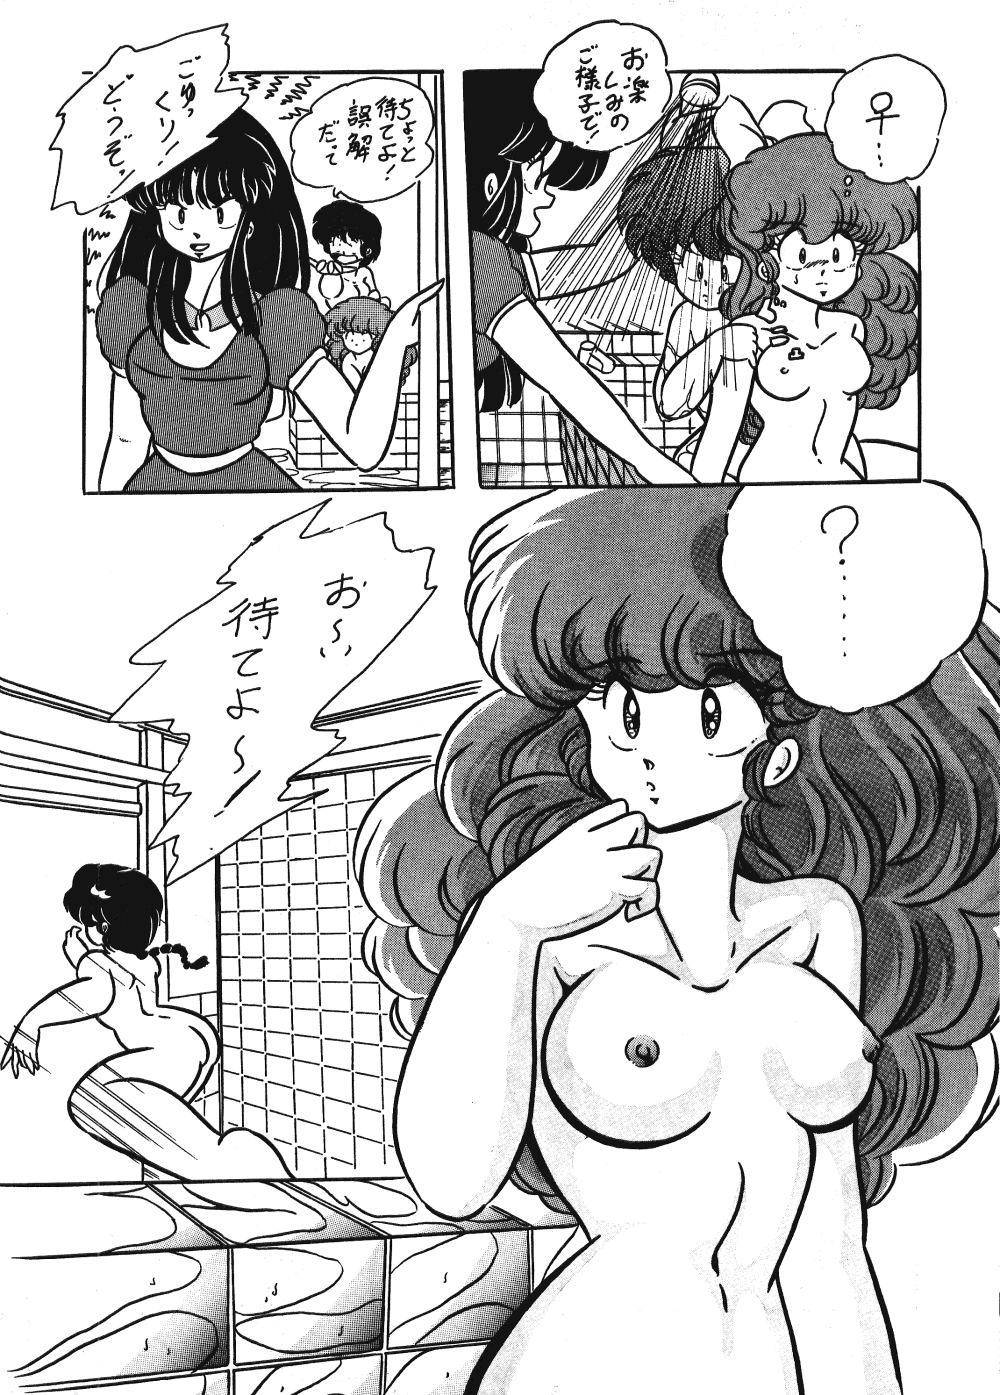 [C-COMPANY] C-COMPANY SPECIAL STAGE 2 (Ranma 1/2) page 23 full